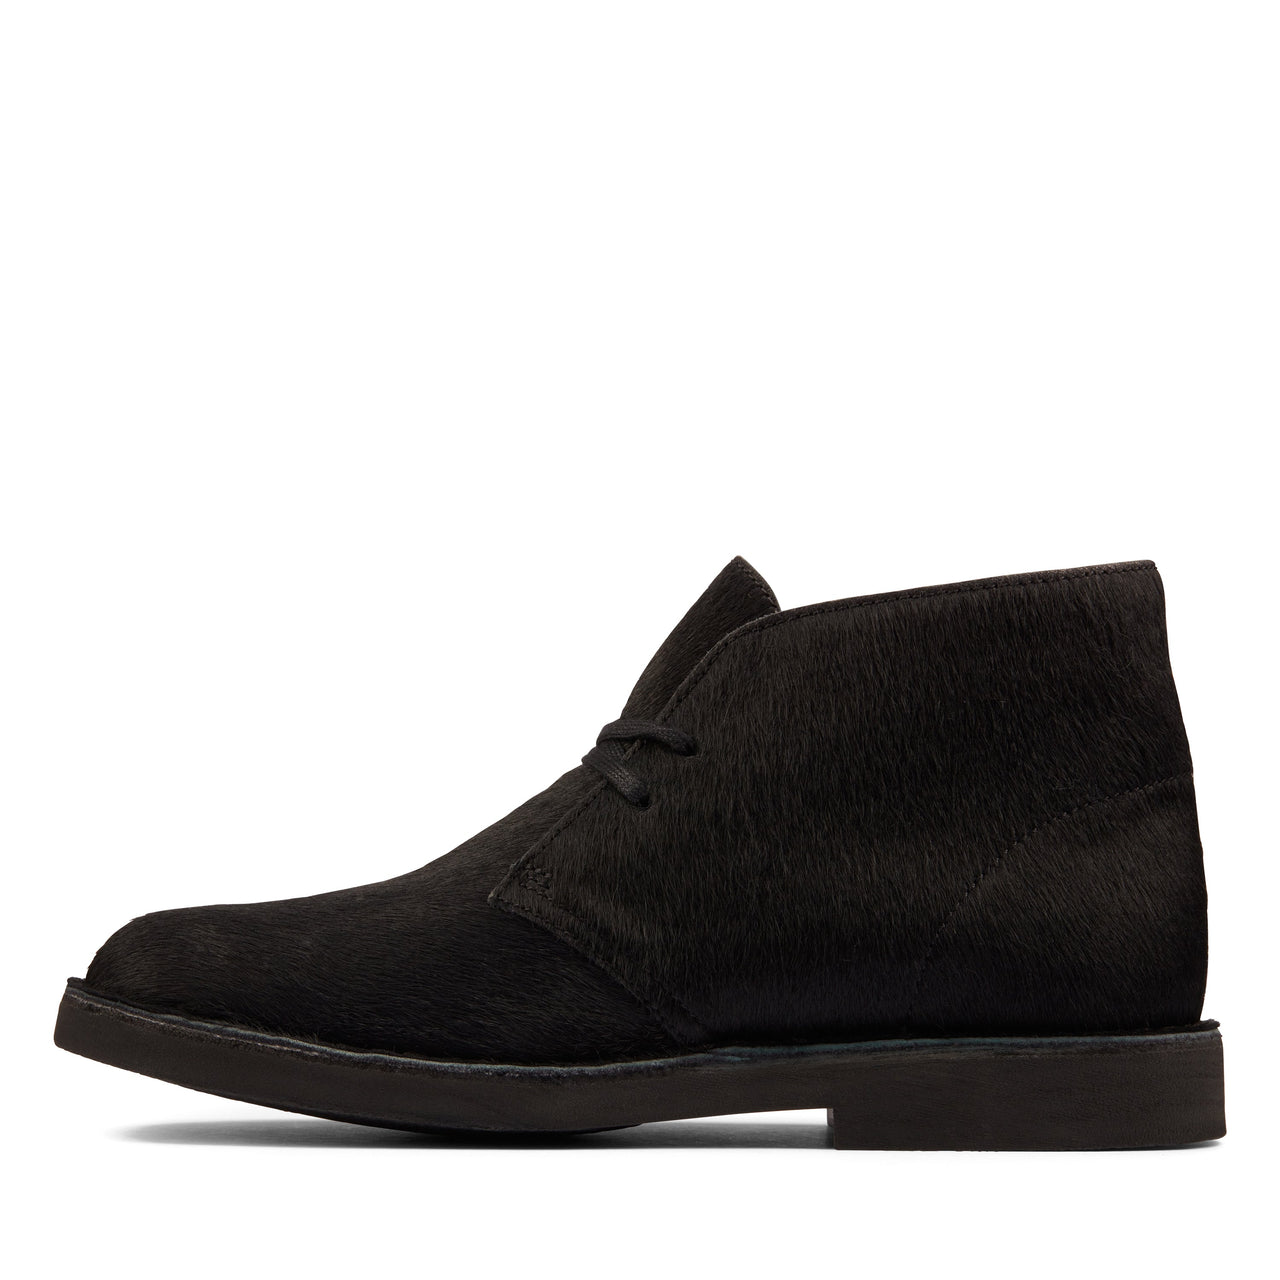 Premium quality Clarks Womens Desert Boot 2 in Black with iconic silhouette and low heel